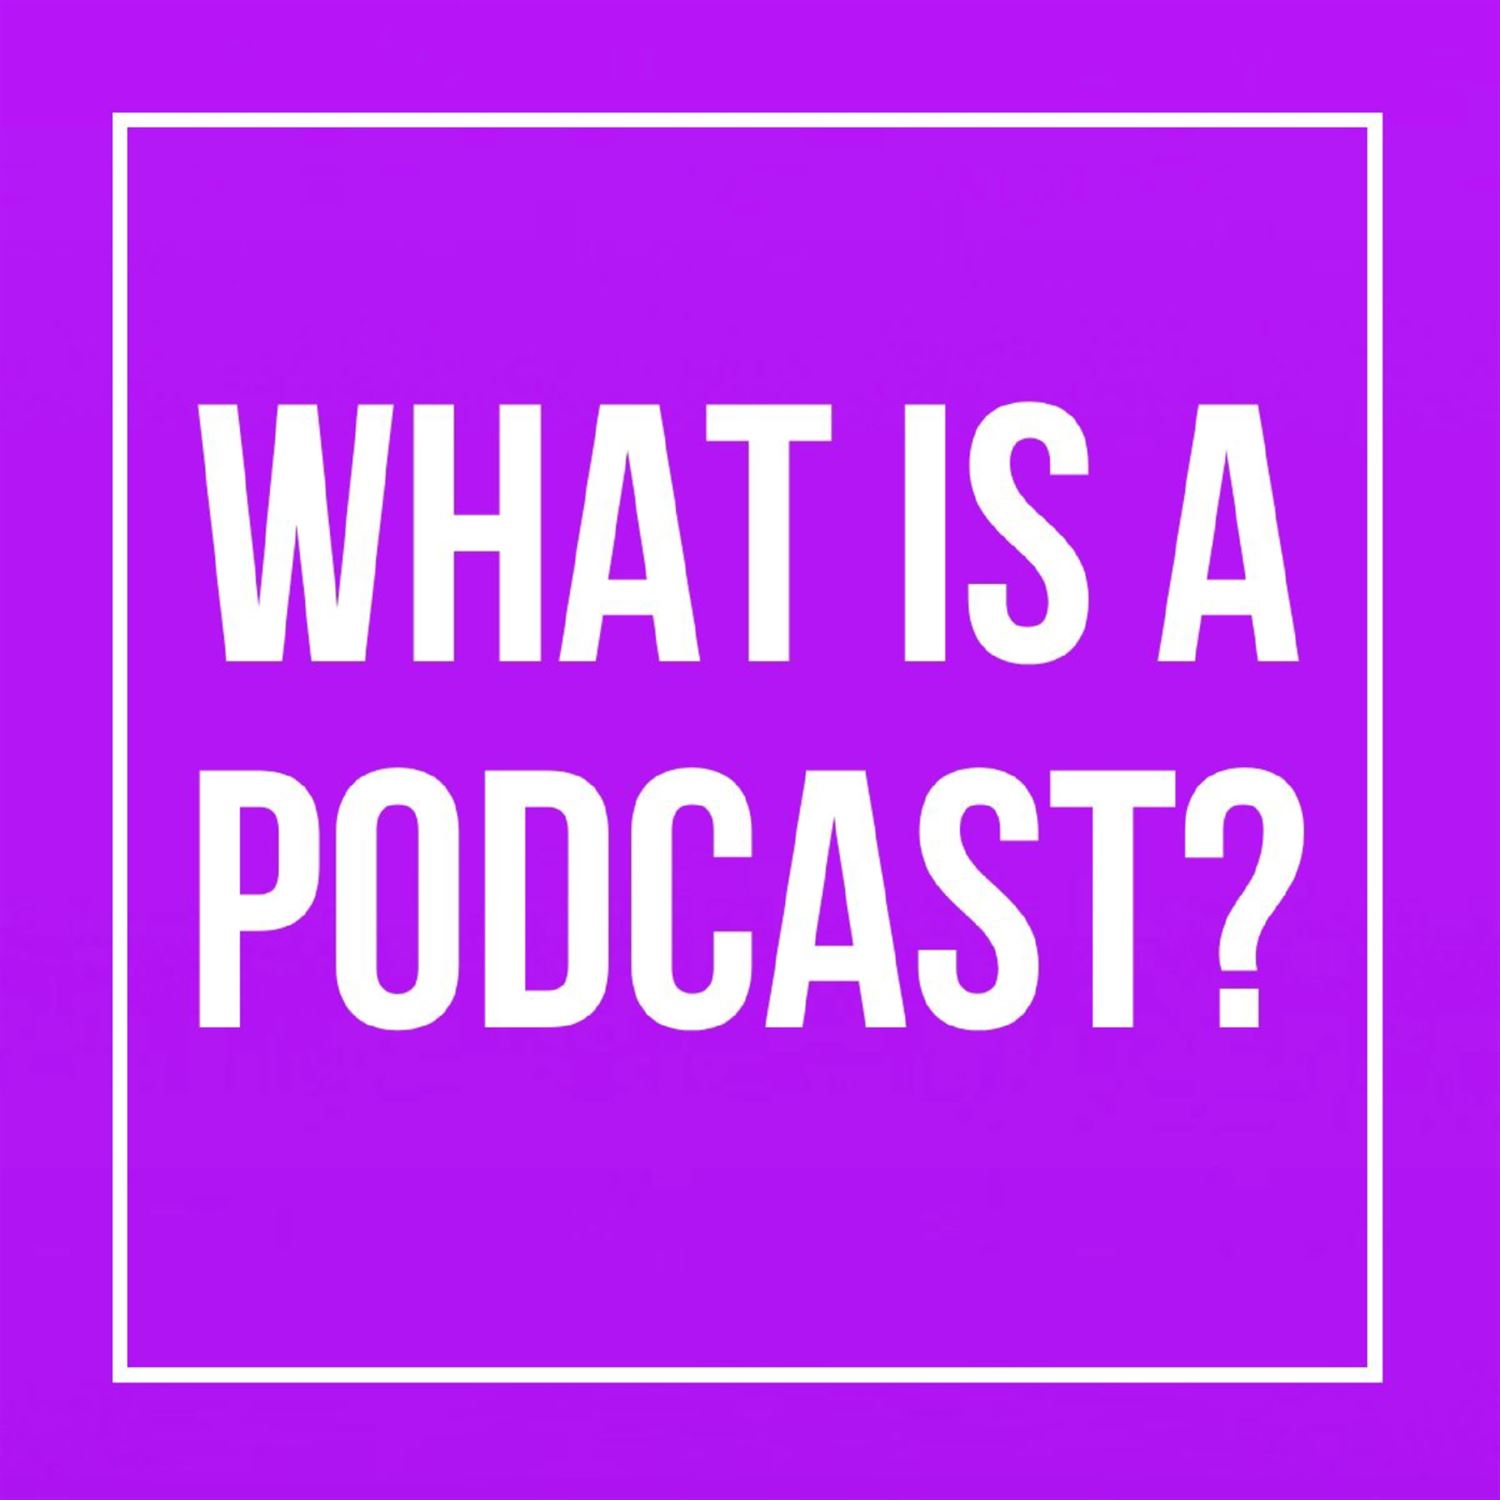 What is podcasting?